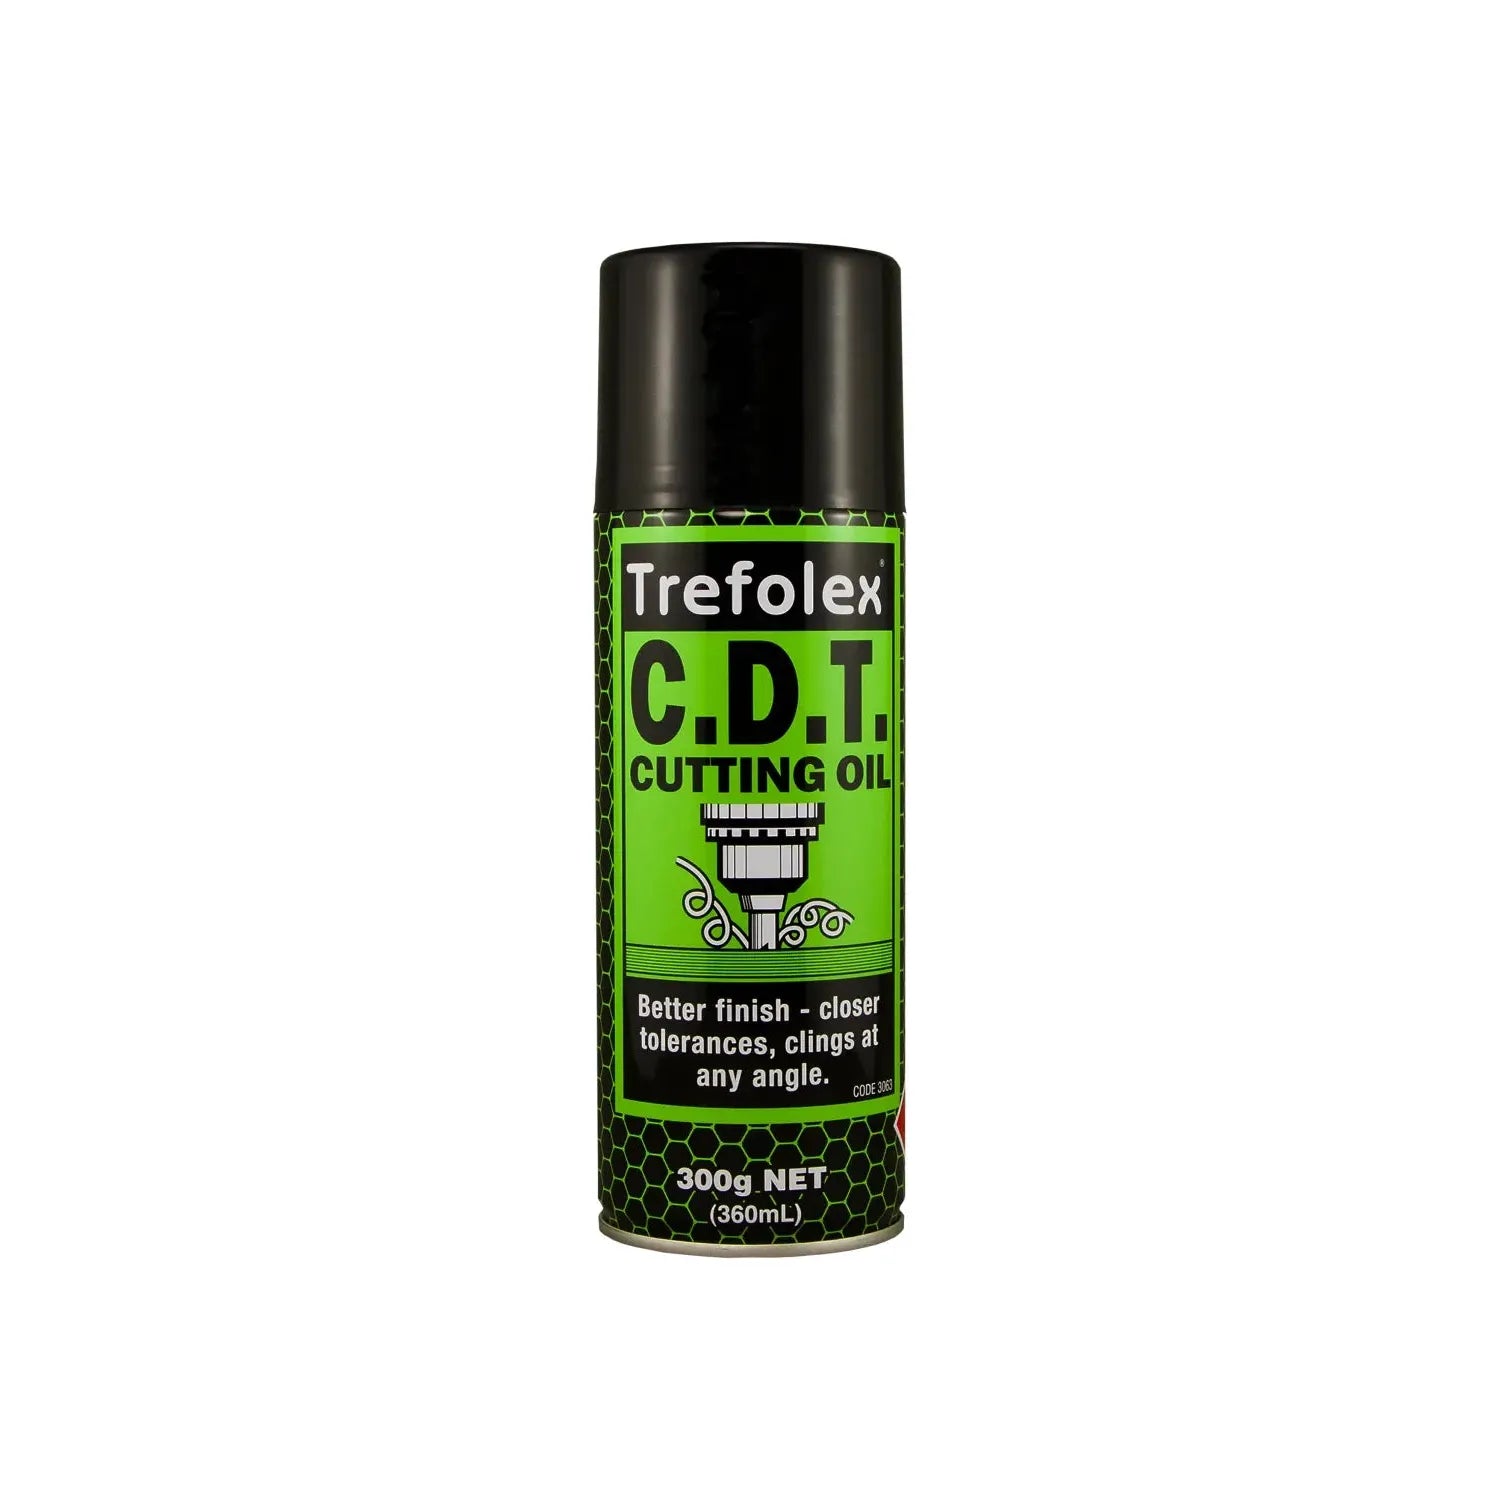 CRC Trefolex CDT Cutting Oil 300g | Product Code : 3063 - South East Clearance Centre